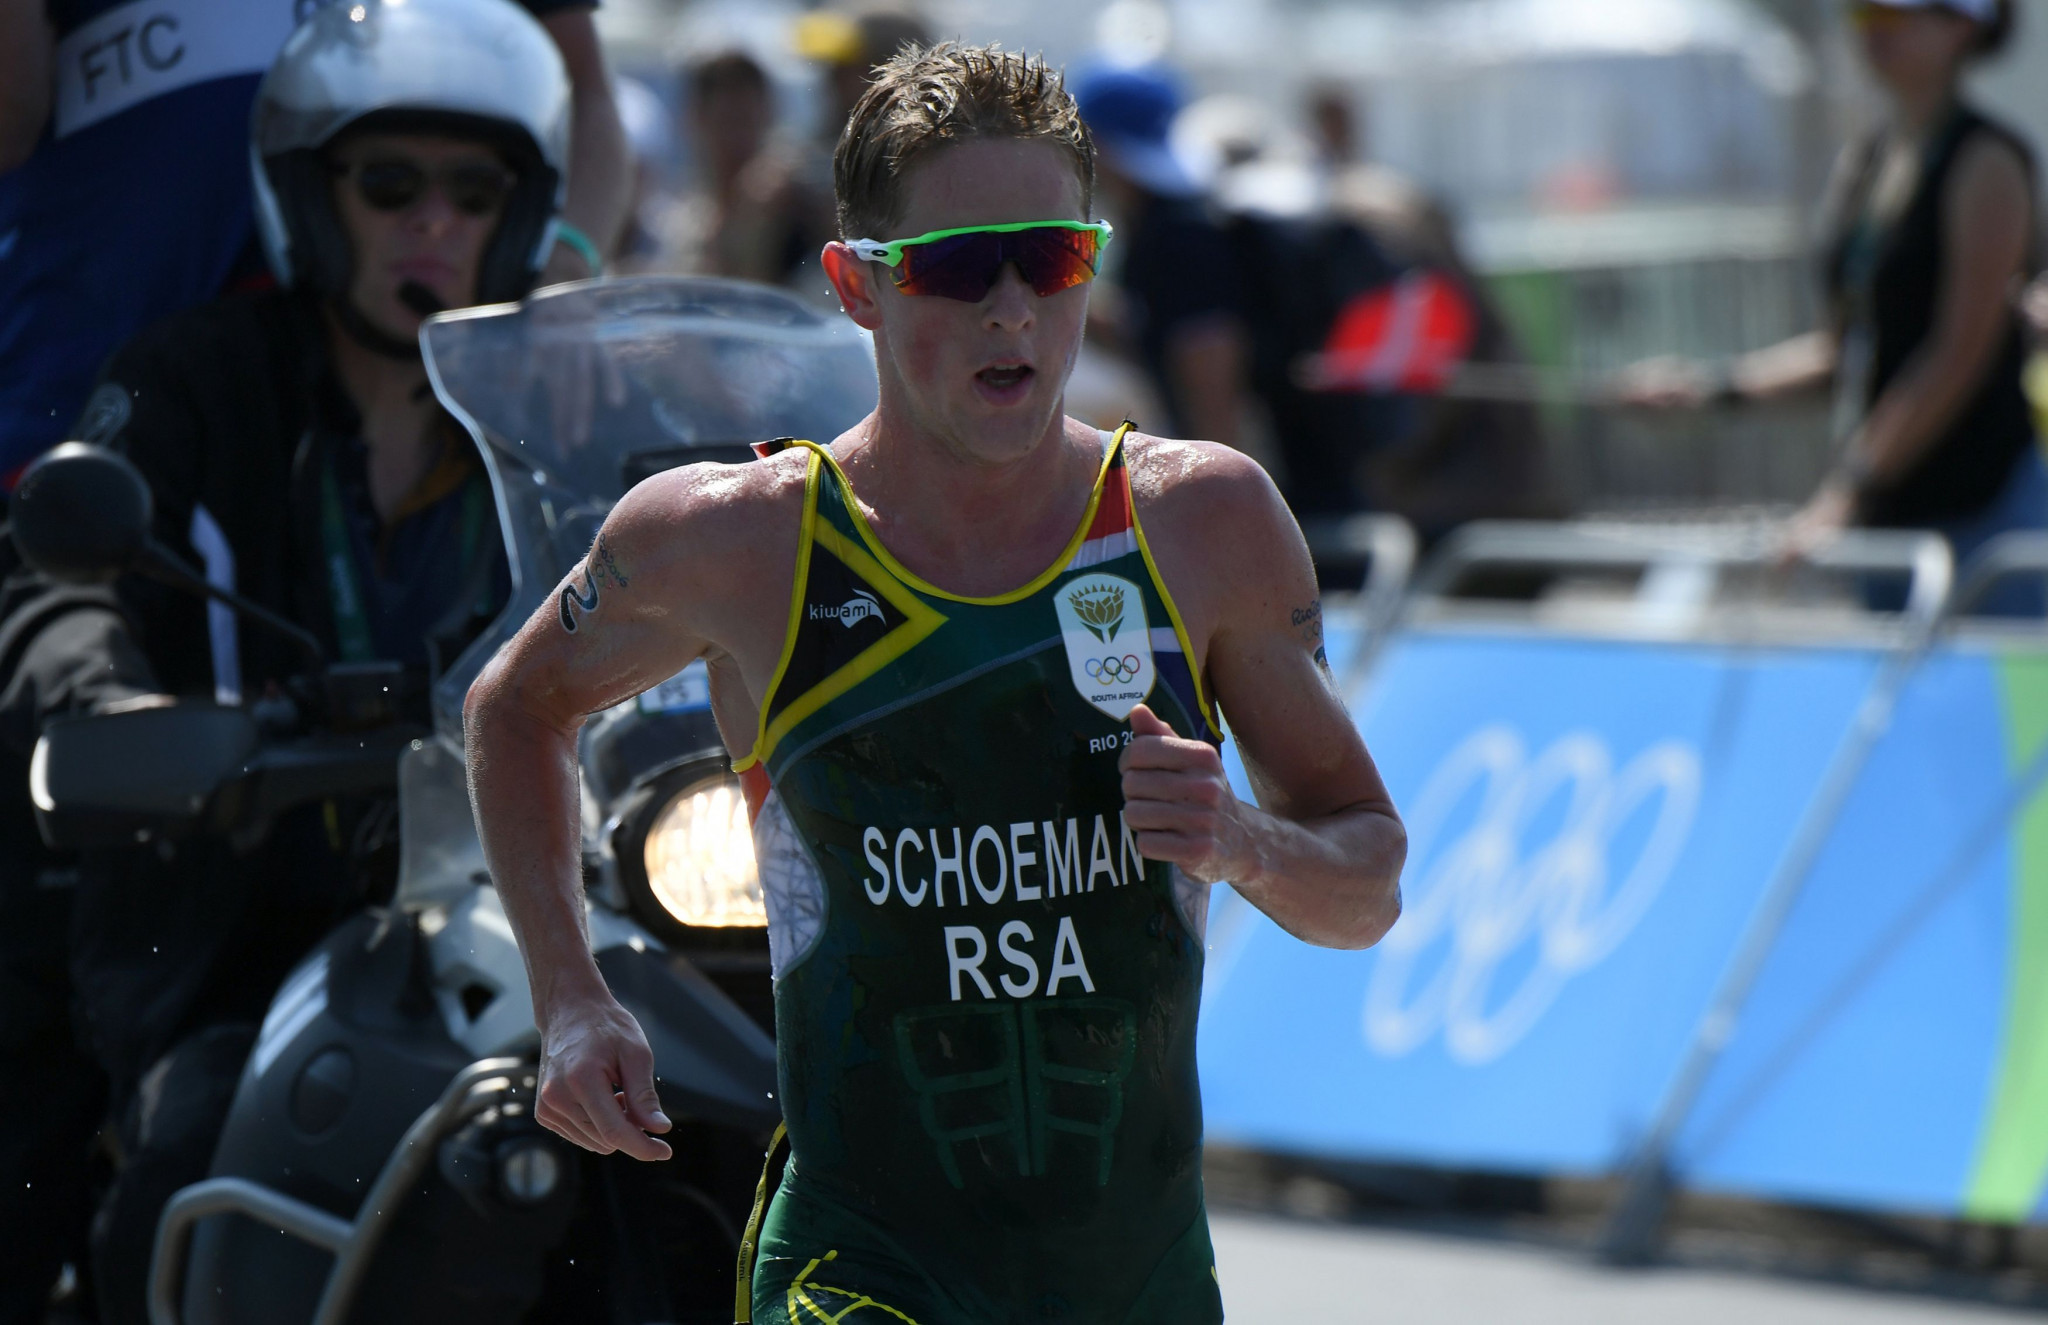 Henri Schoeman finished behind Britain's Brownlee brothers in Rio de Janeiro ©Getty Images